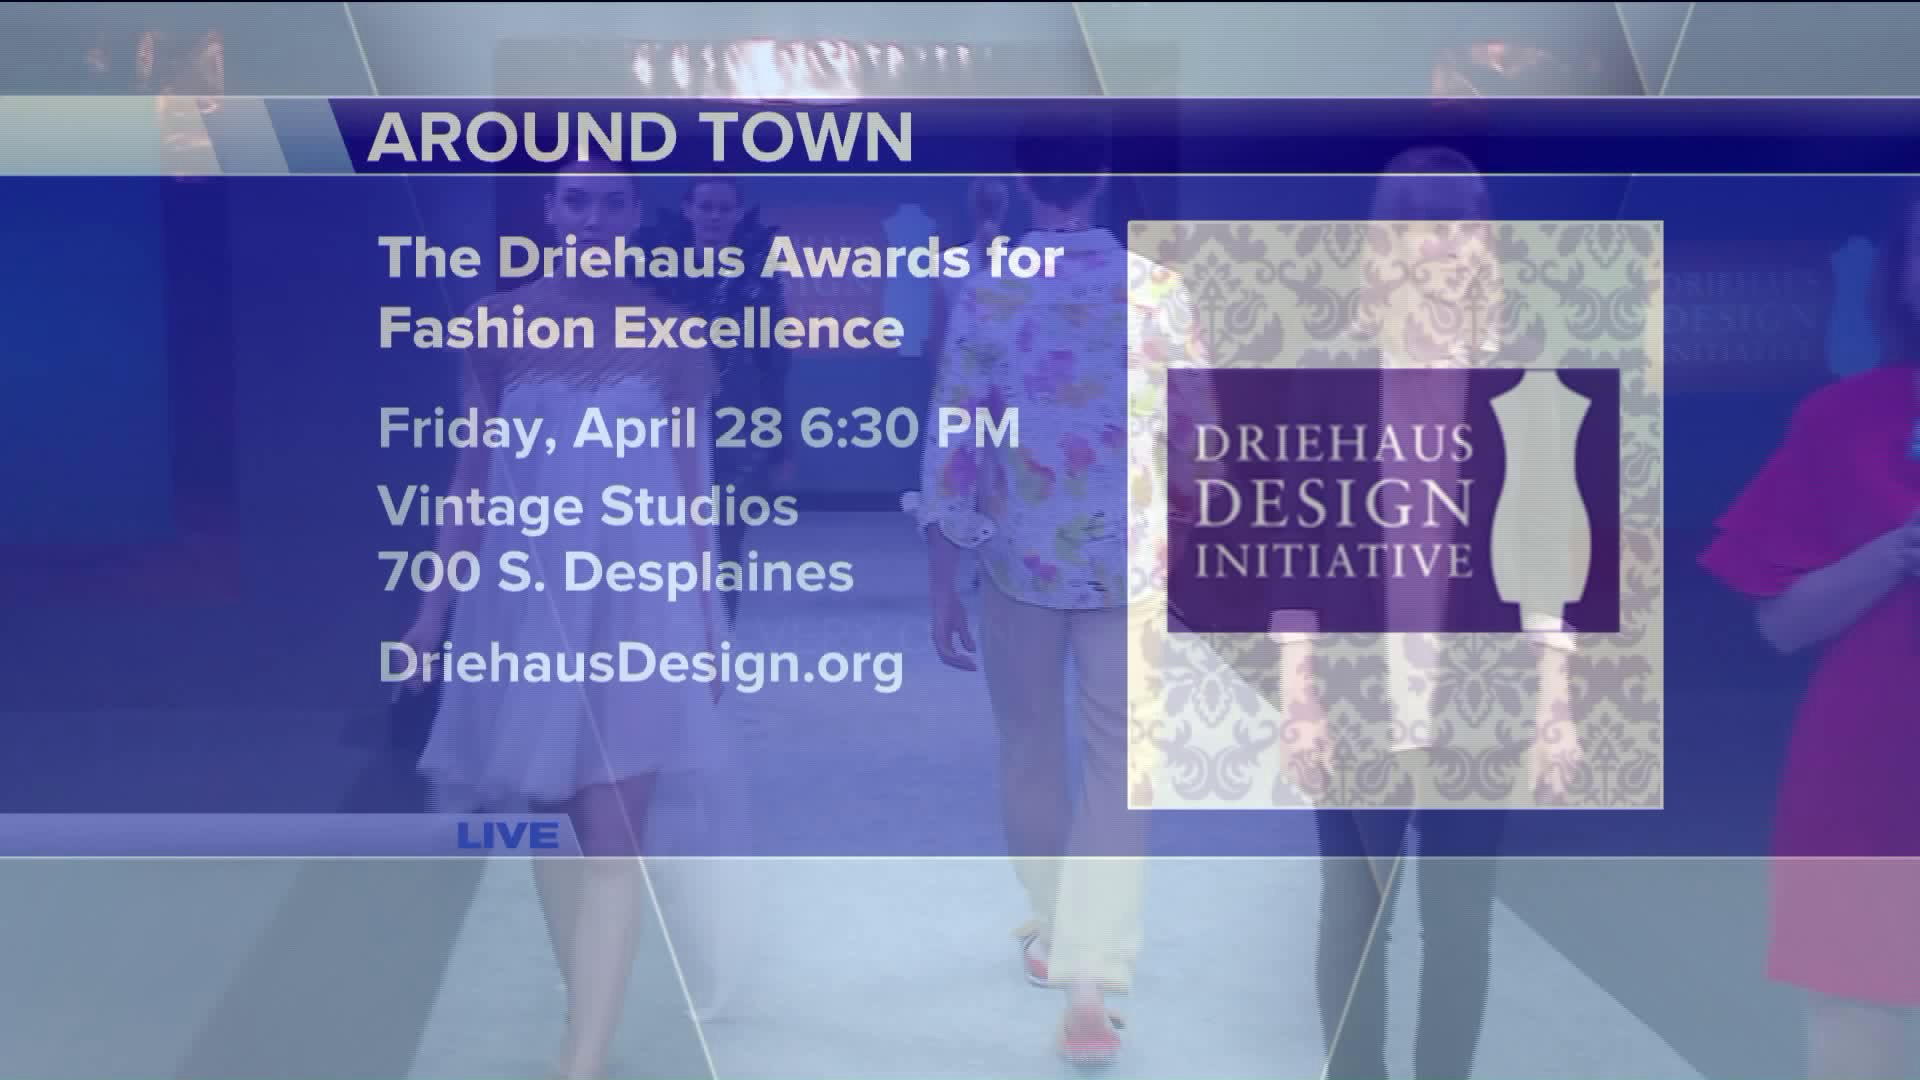 Around Town visits the Driehaus Awards for Fashion Excellence